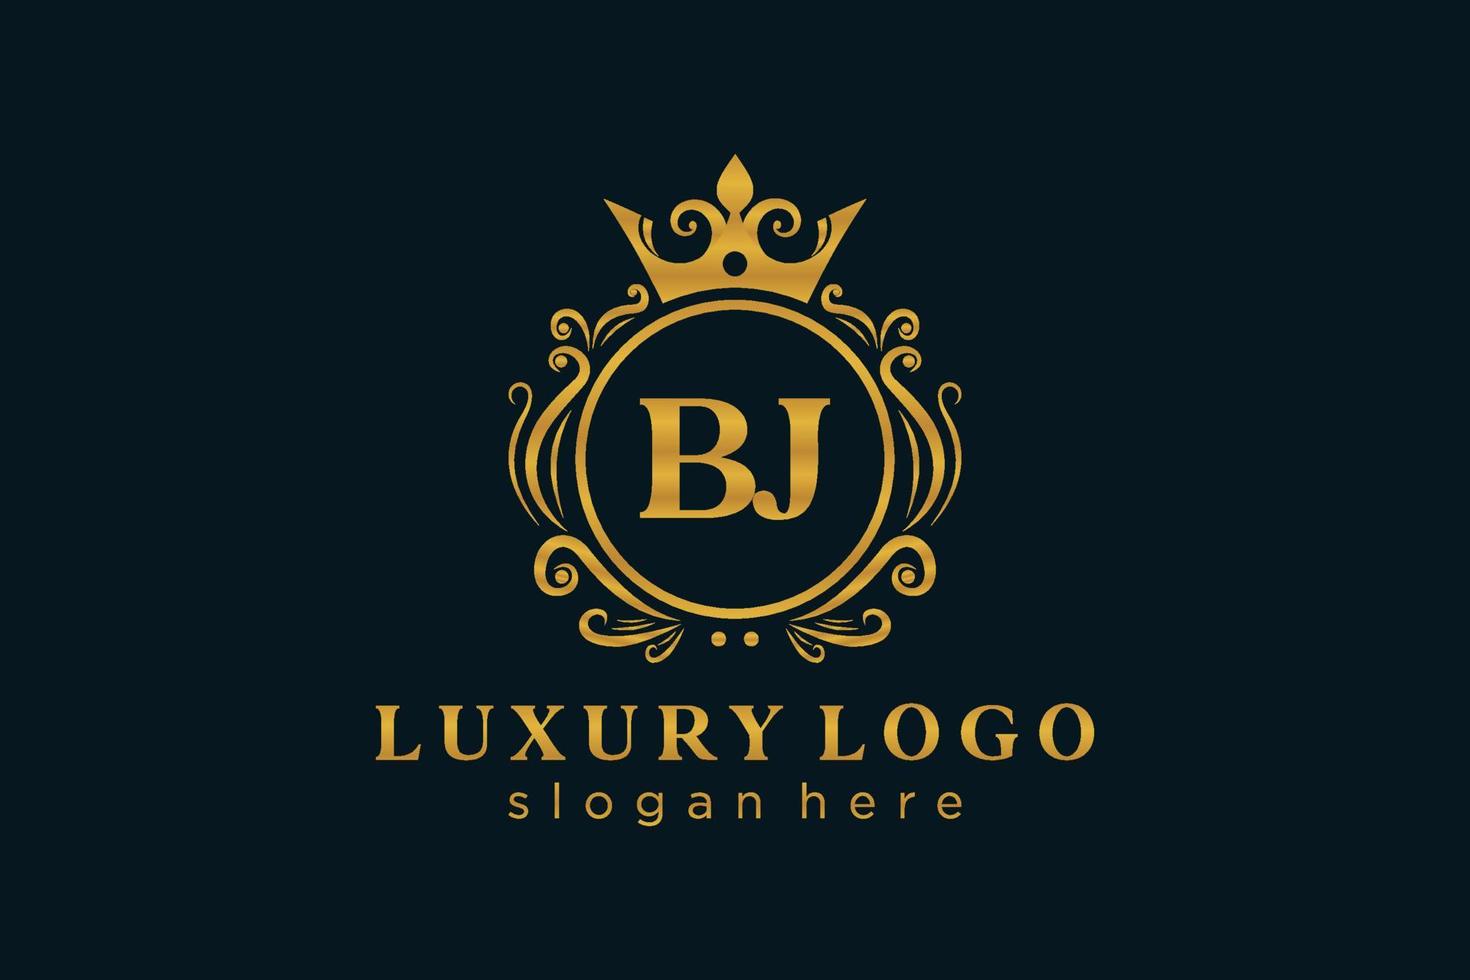 Initial BJ Letter Royal Luxury Logo template in vector art for Restaurant, Royalty, Boutique, Cafe, Hotel, Heraldic, Jewelry, Fashion and other vector illustration.